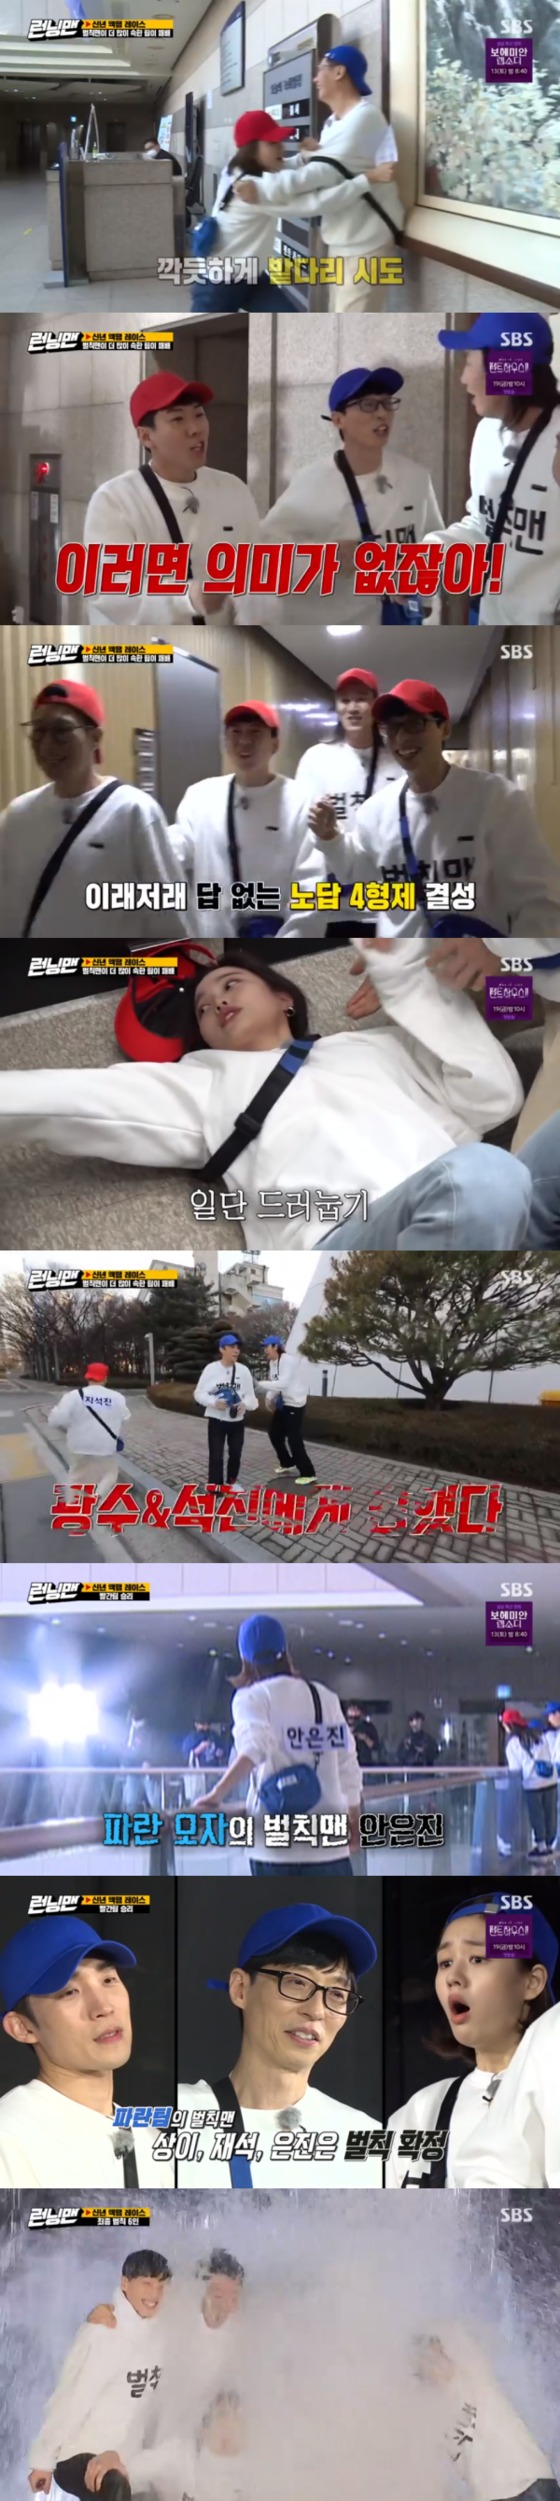 ‘Running Man’ Lee Sang-i x Ahn Eun-jin x Bae Yoon-kyung, Rising properly for the New Year’s troubles